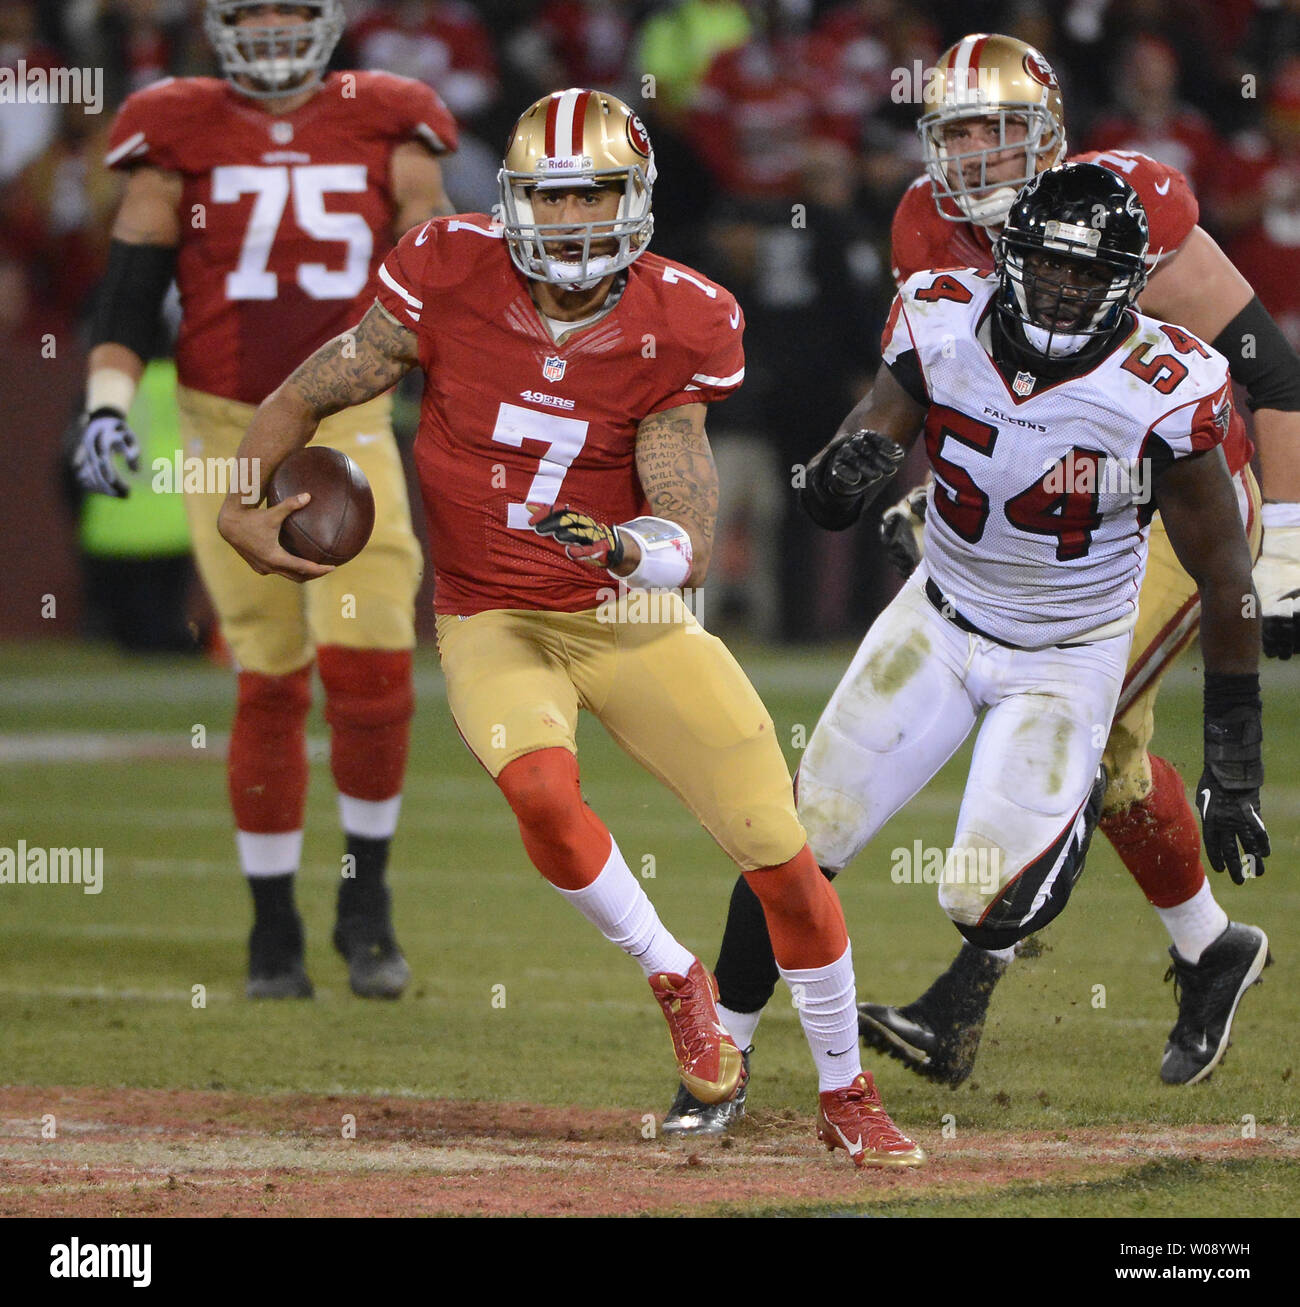 San Francisco 49ers QB Colin Kaepernick (7) scrambles for 22 yards in the  third quarter against the Atlanta Falcons at Candlestick Park in San  Francisco on December 23, 2013. The 49ers defeated